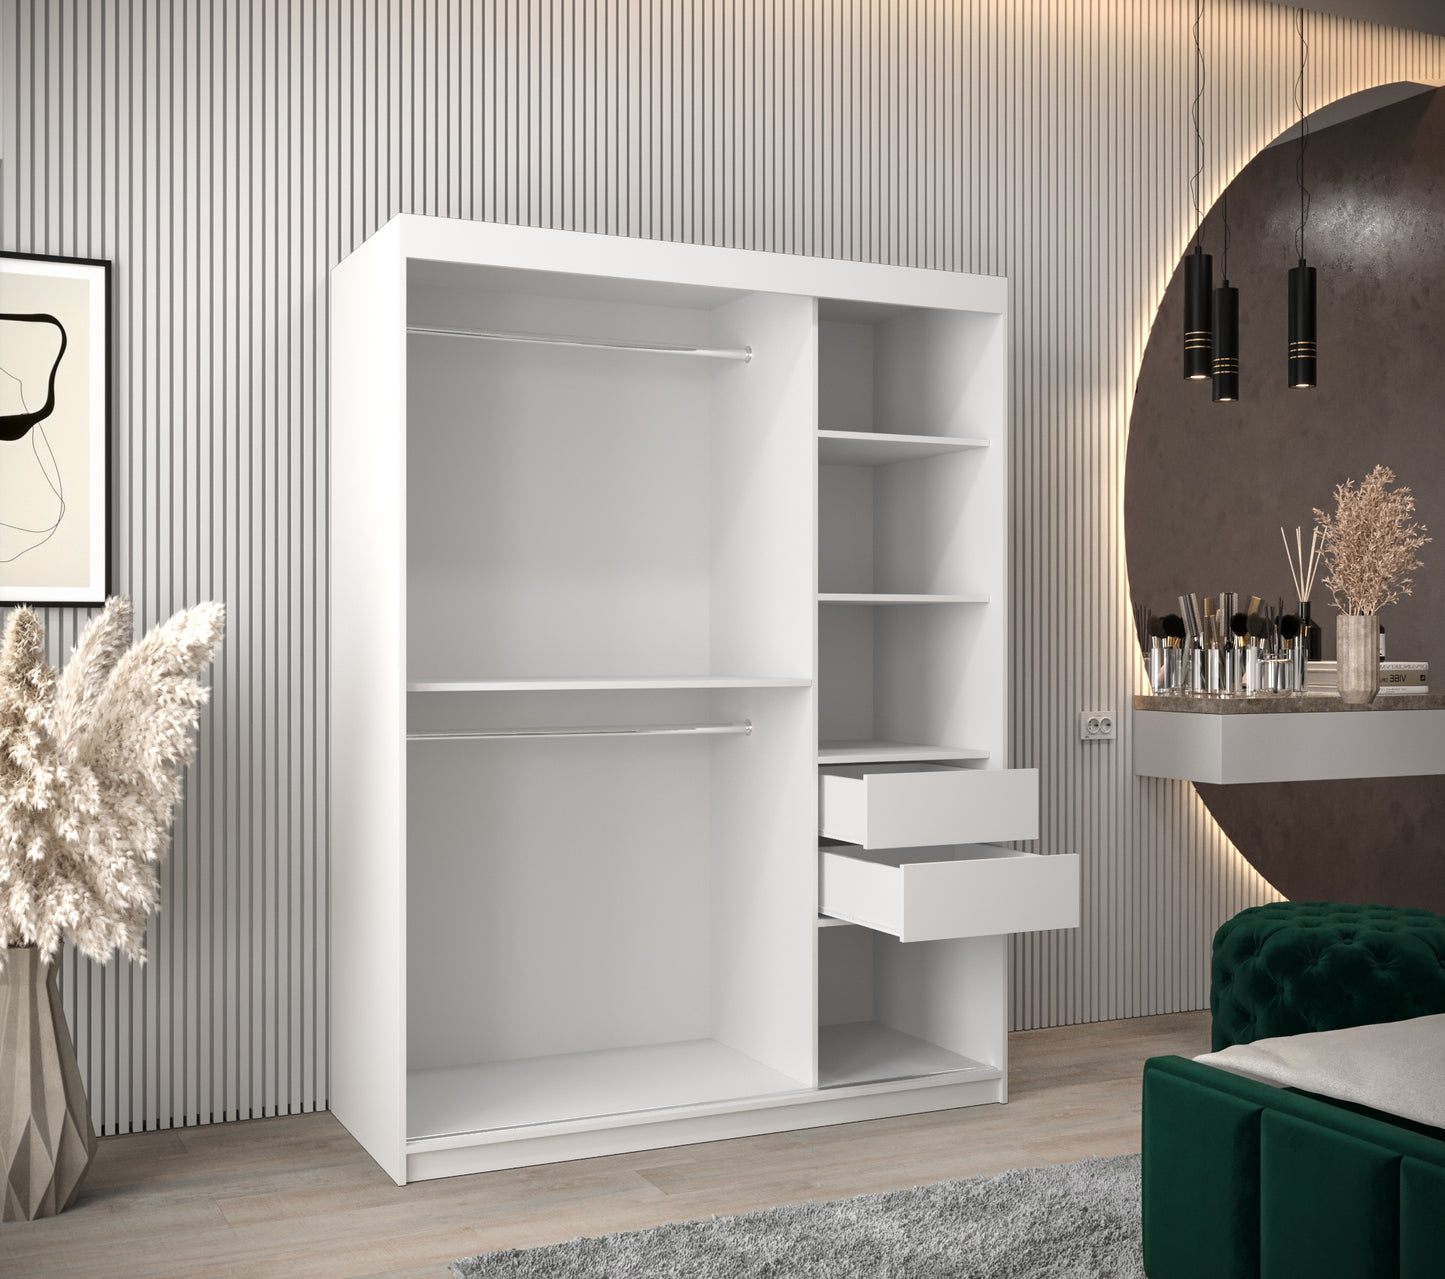 LOUVRE - Wardrobe with 2 Sliding Doors Black or White with Shelves, Rails, Drawers Optional >150cm<